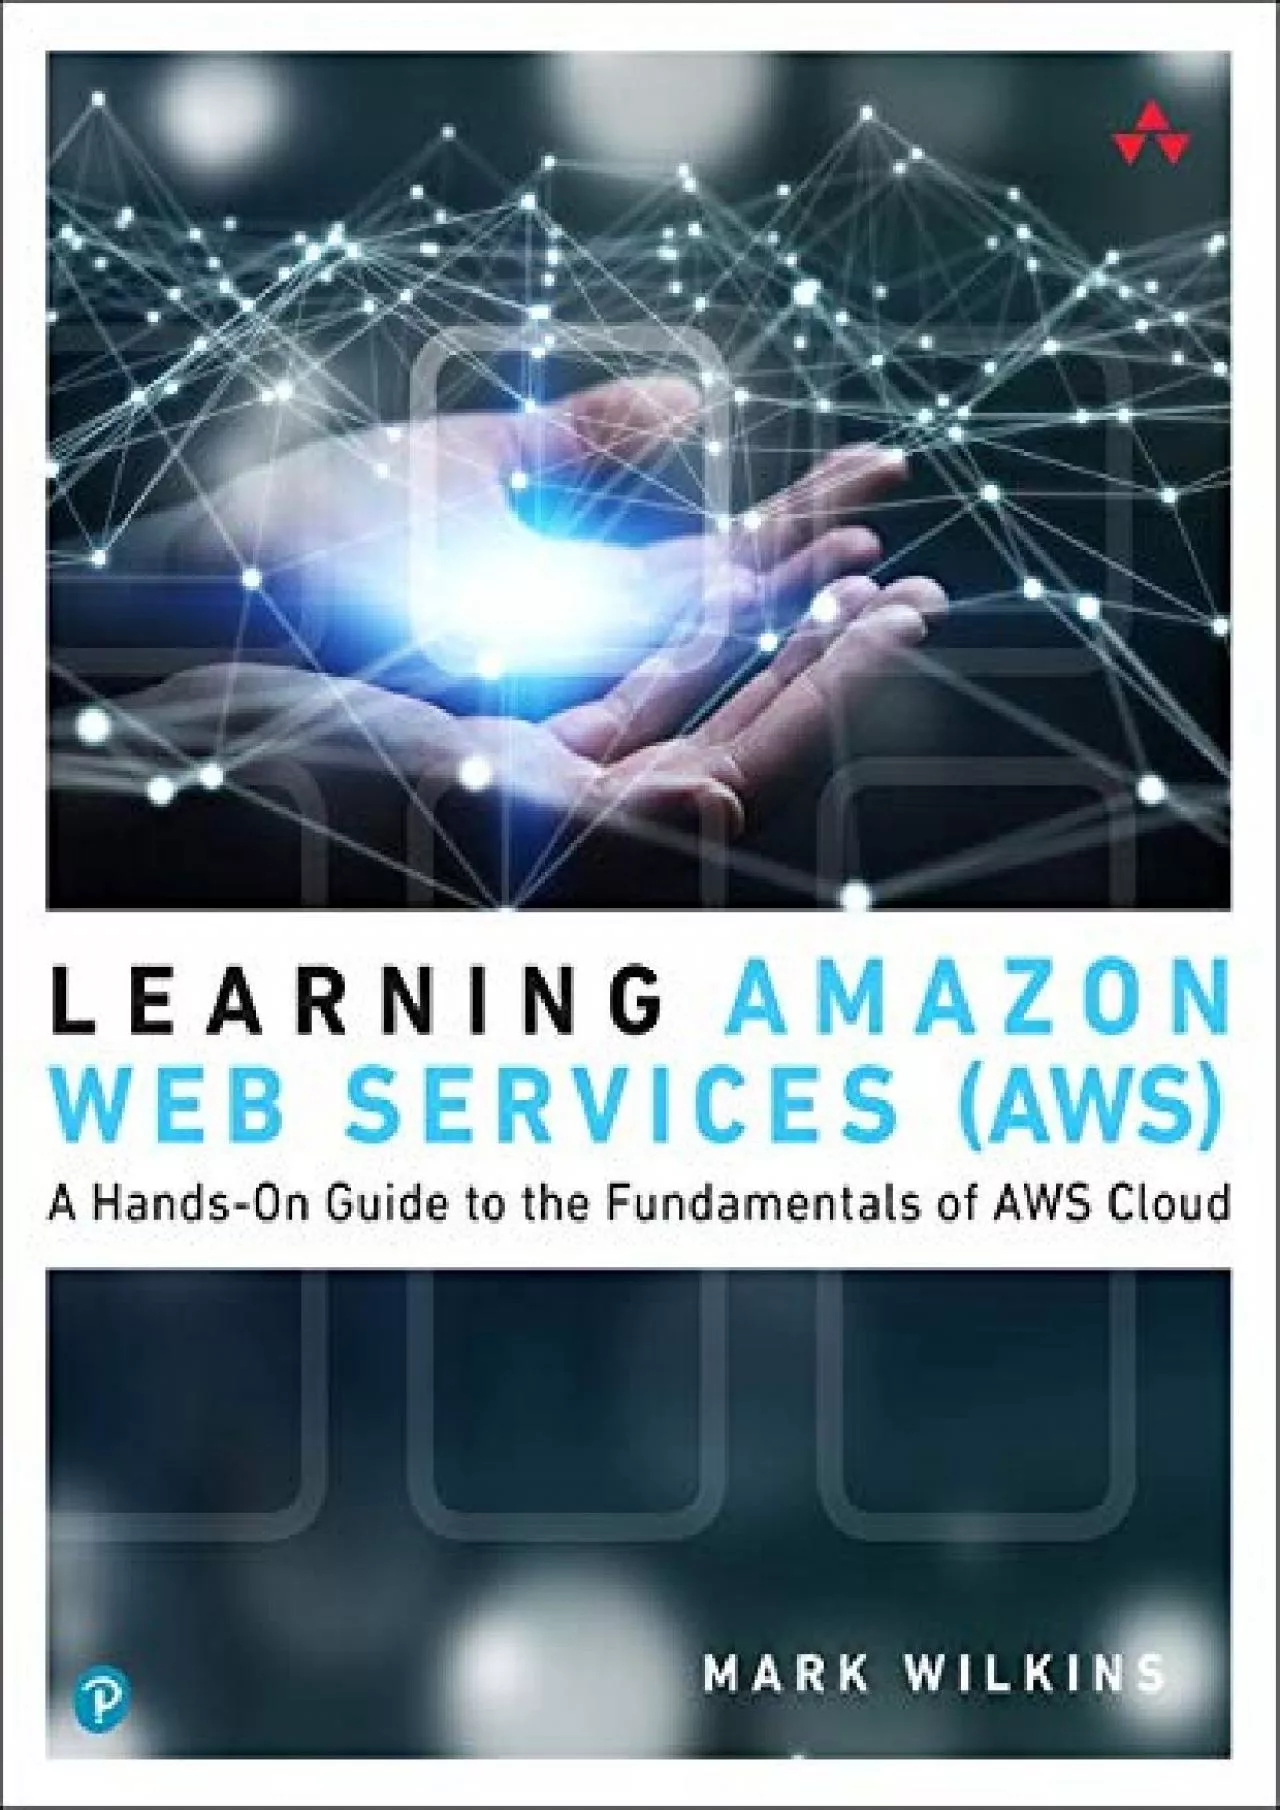 [READING BOOK]-Learning Amazon Web Services (AWS): A Hands-On Guide to the Fundamentals